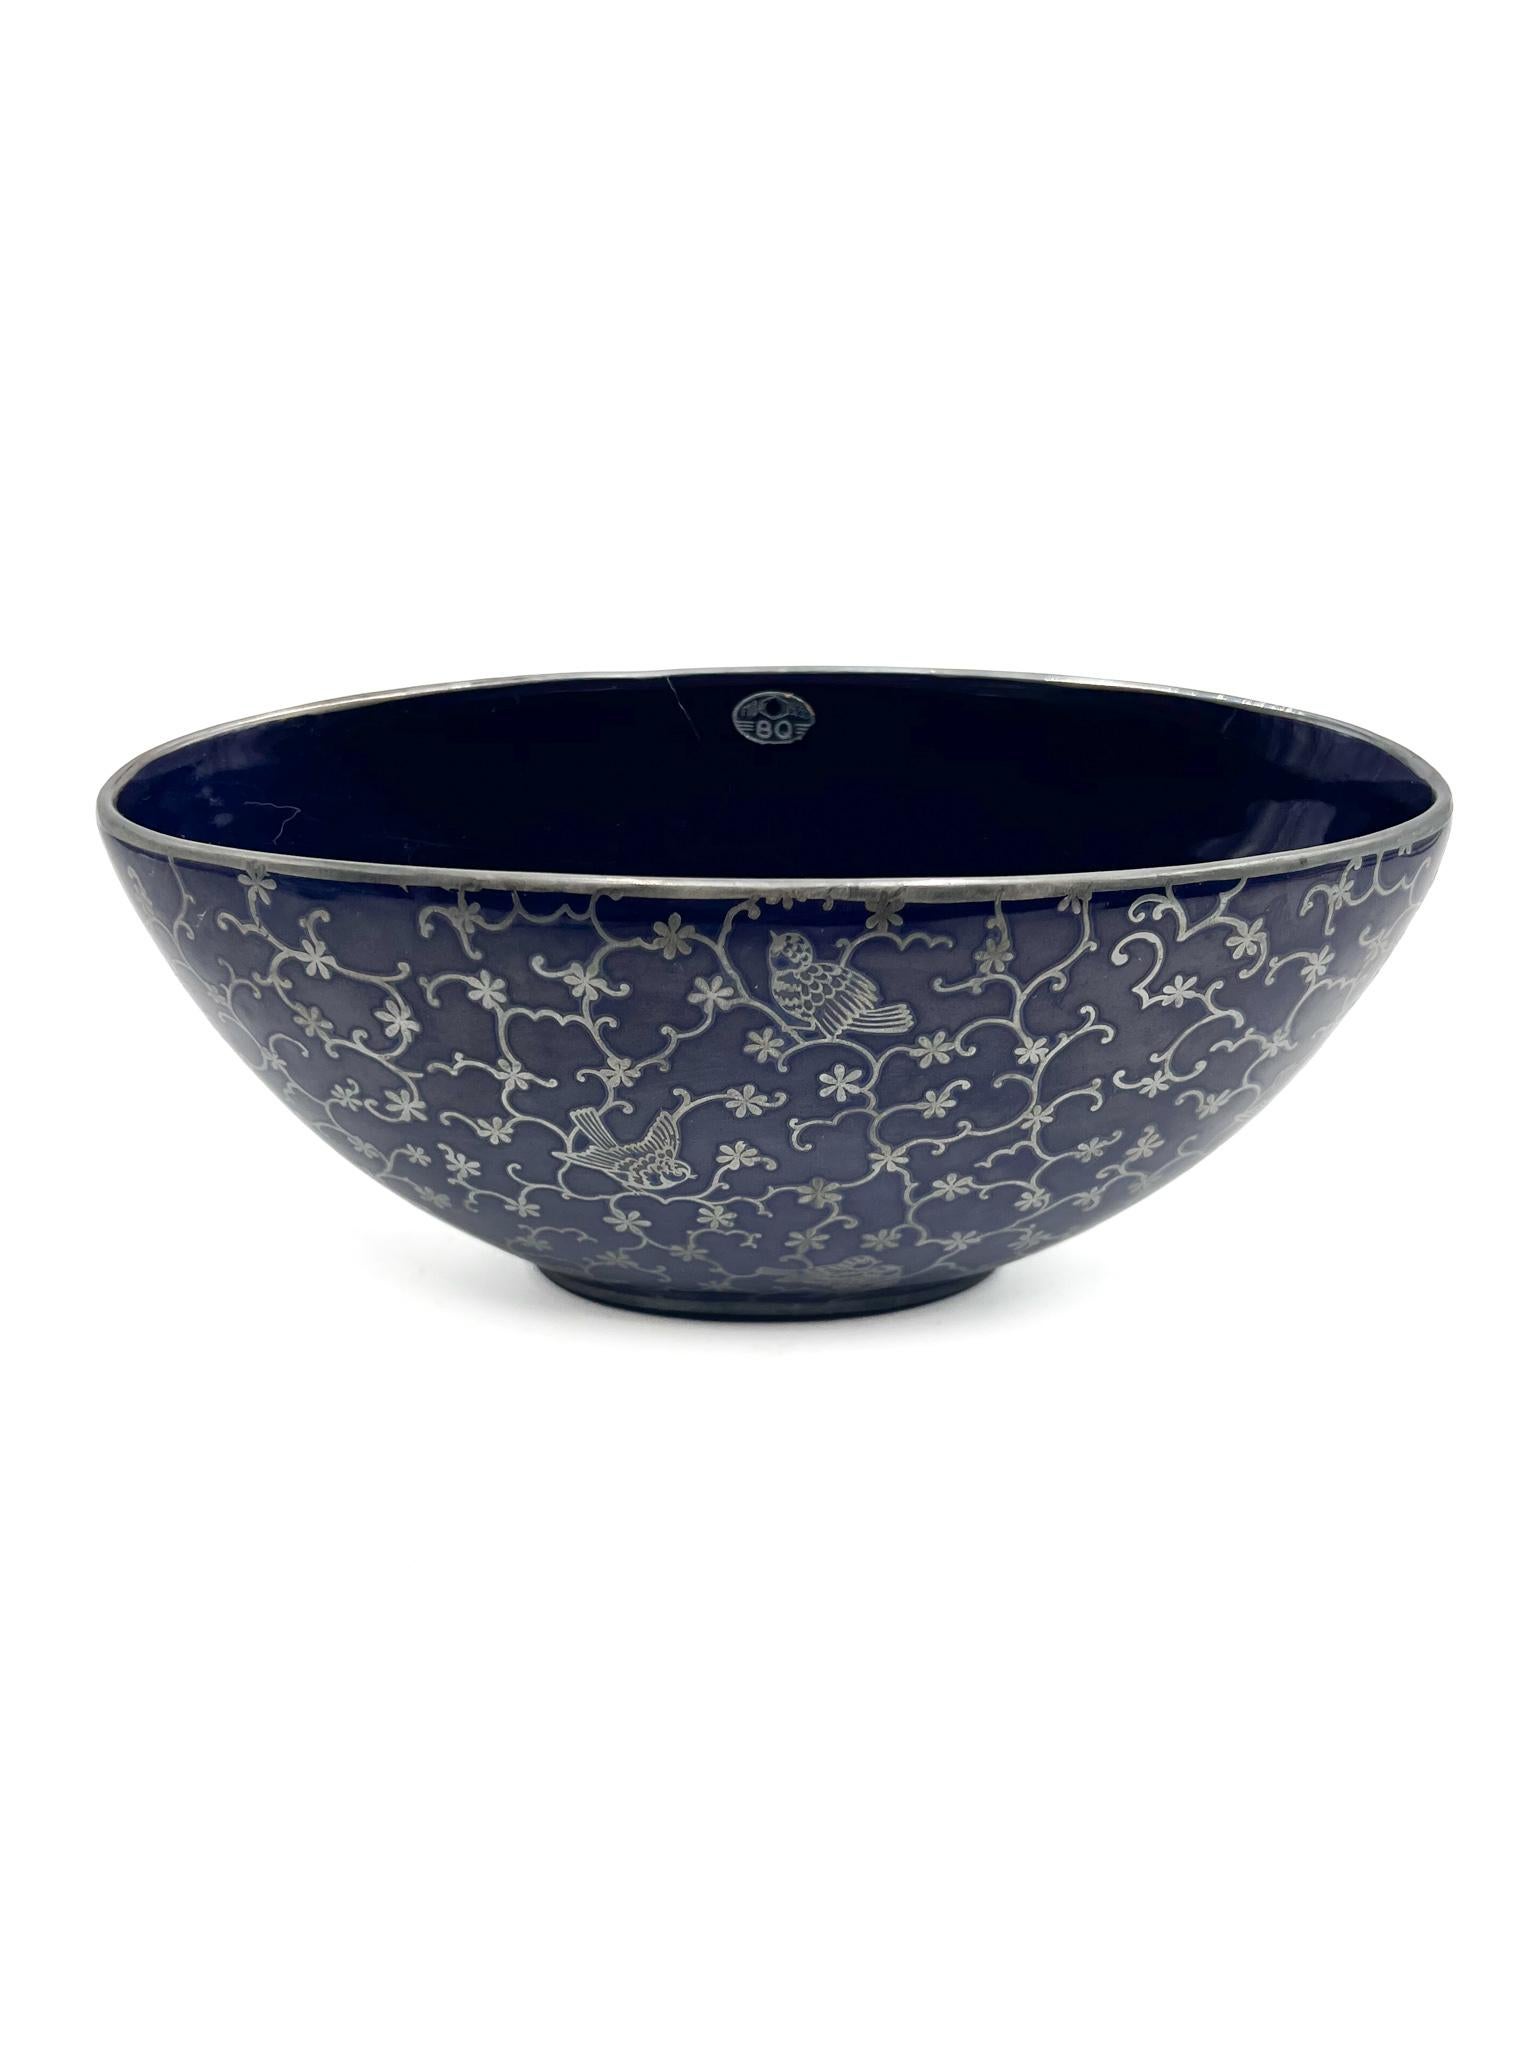 Blue ceramic centerpiece / bowl with silver decorations, made by Richard Ginori in the 1960s

Measures: Ø cm 24 Ø cm 11 h cm 11

Company of Italian origin founded in 1896 when the Marquis Carlo Ginori, passionate about white gold, arrives in